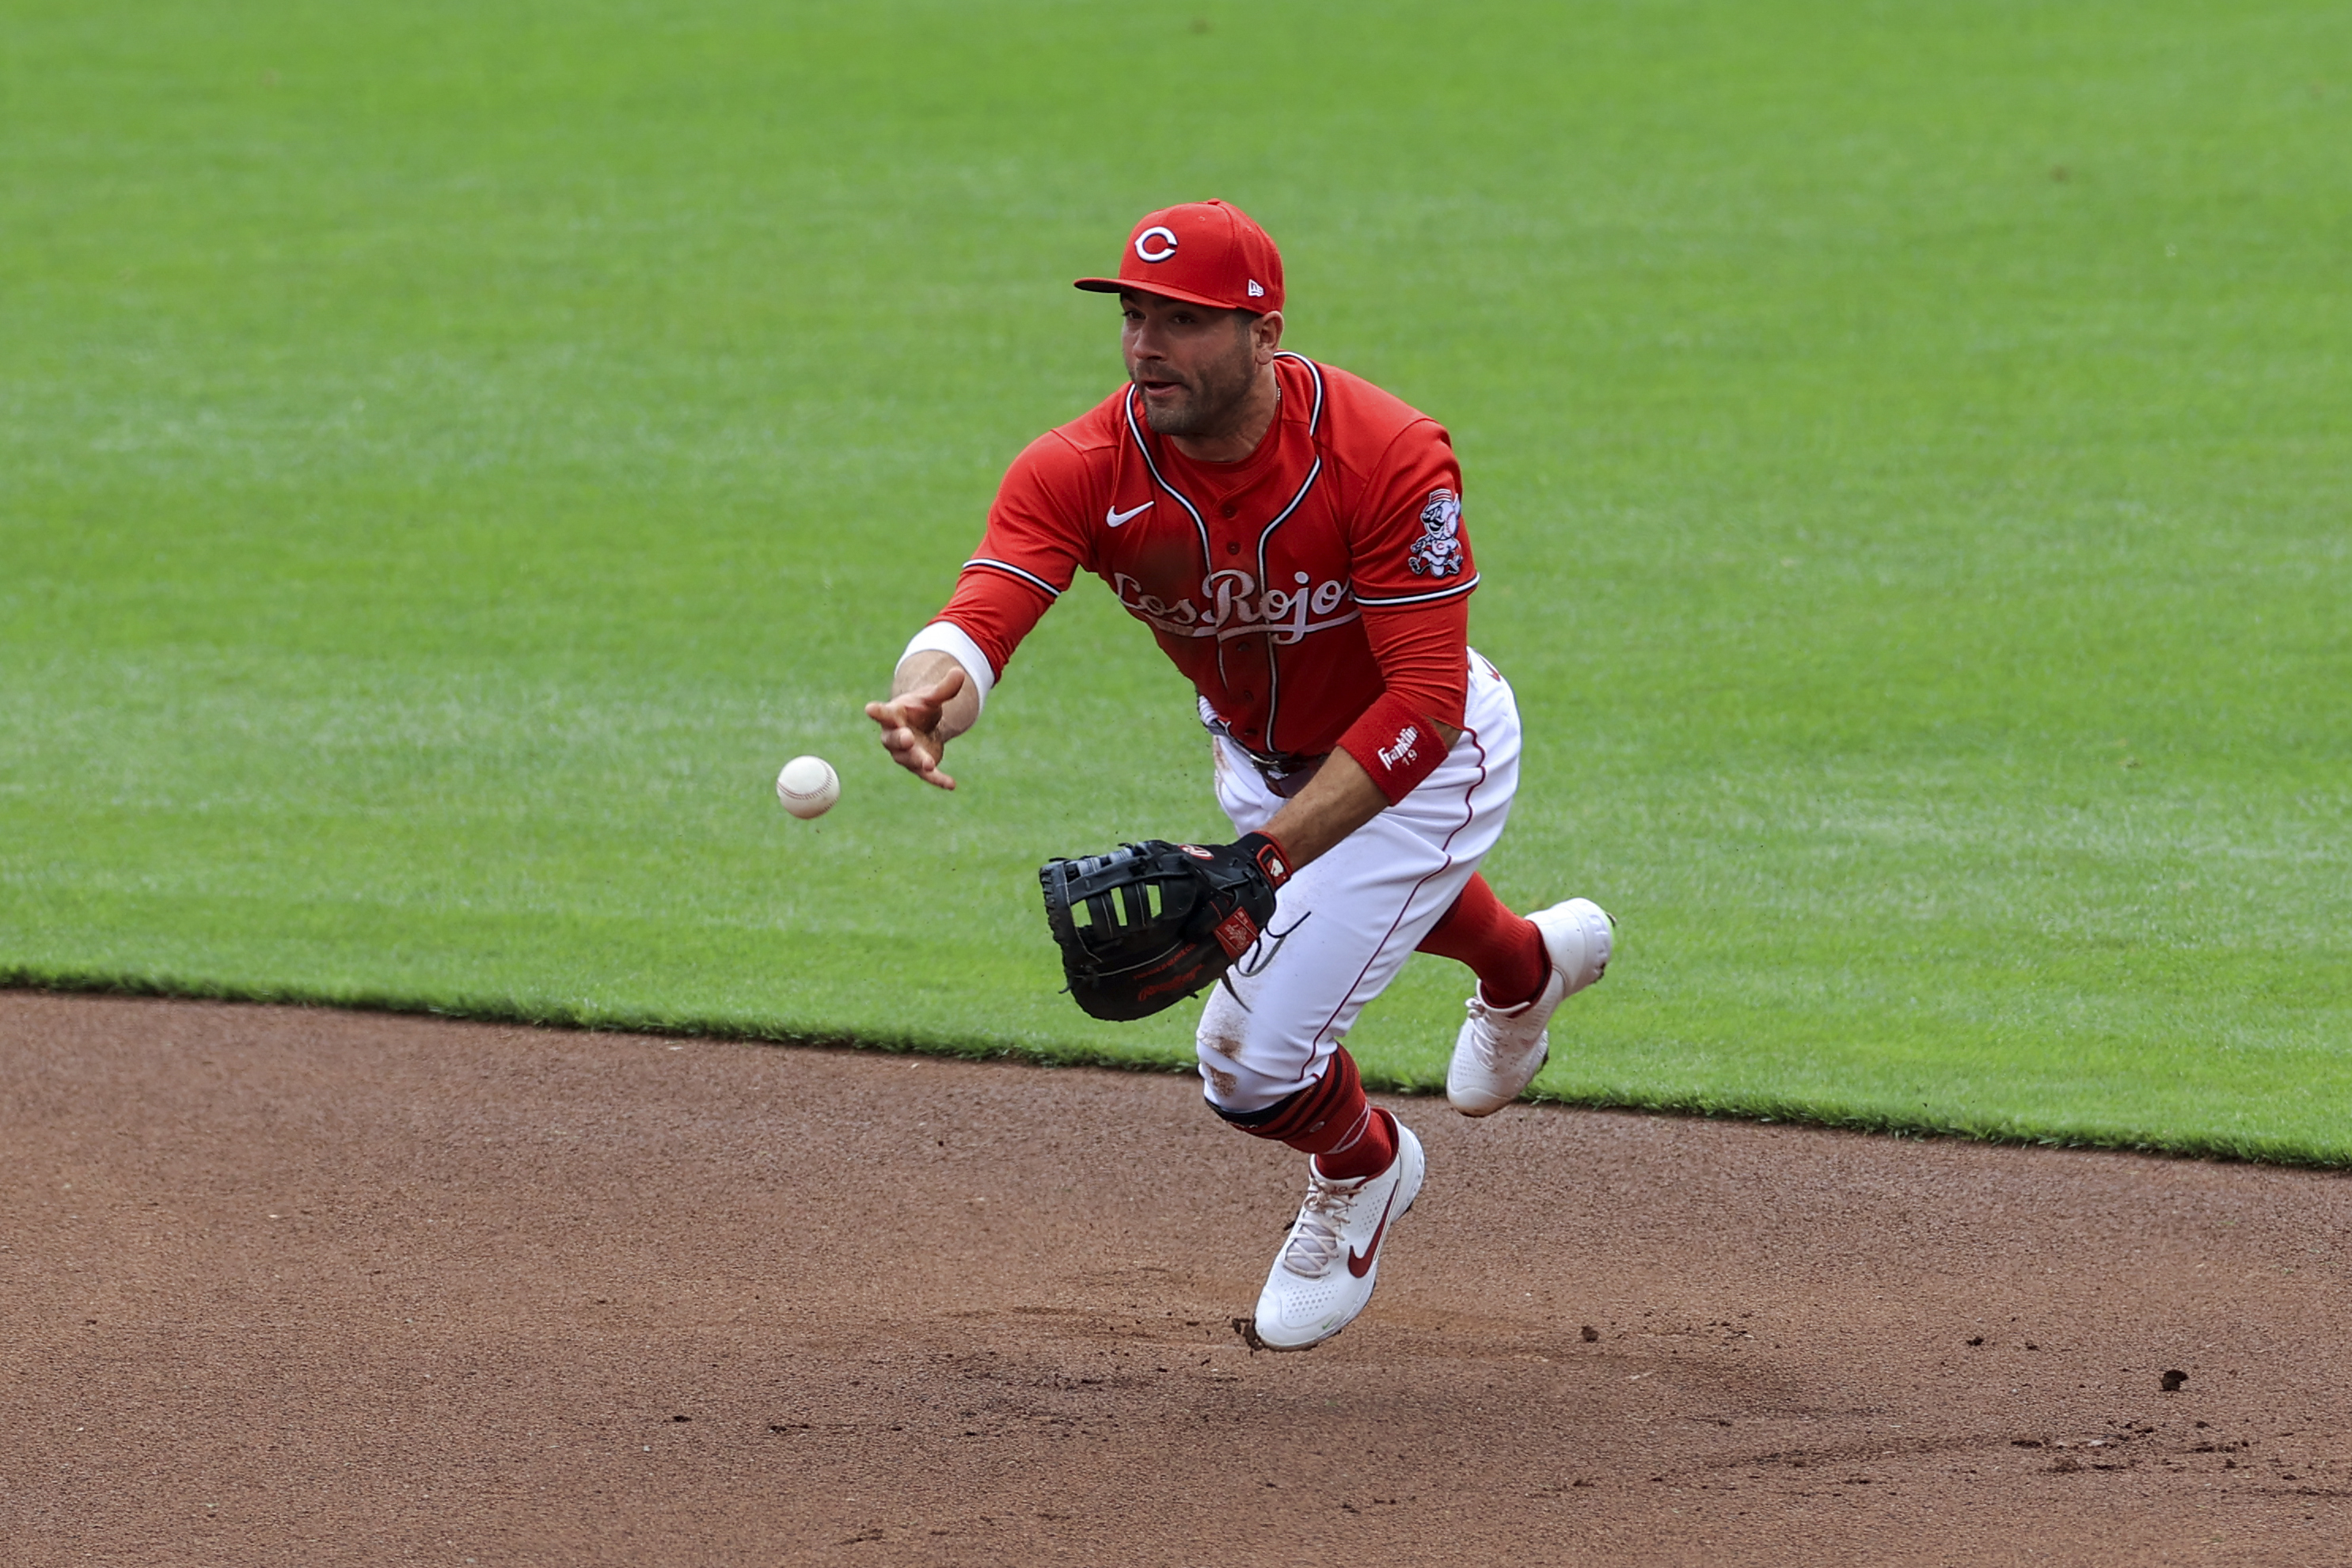 Why Jesse Winker Should Fill in at First Base During Joey Votto's Absence